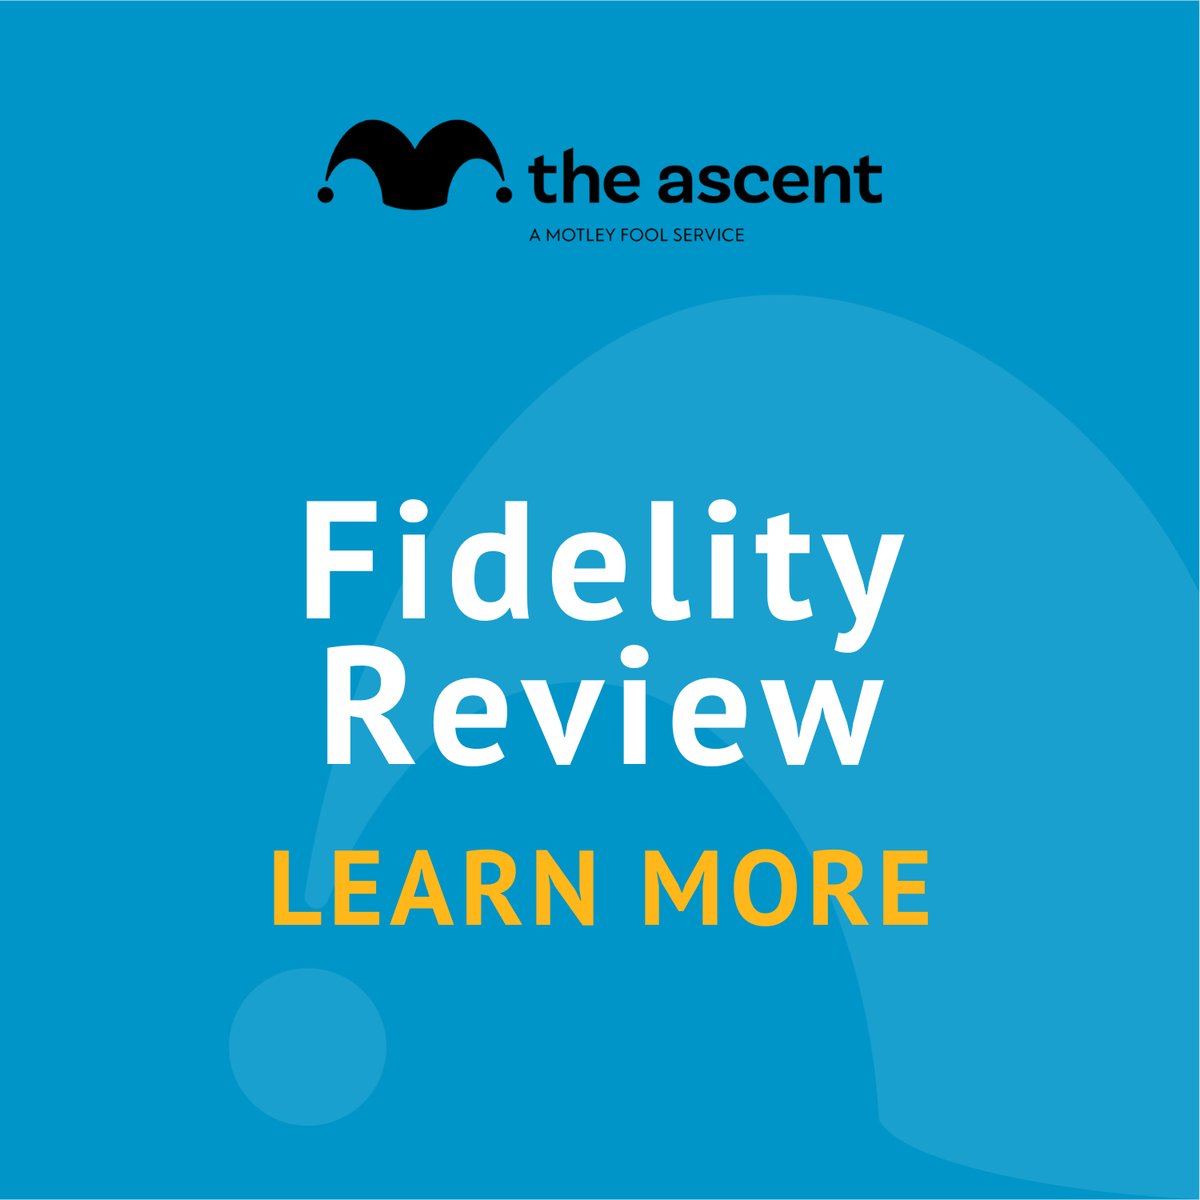 Fidelity Review: Top Broker With Extensive Research Tools